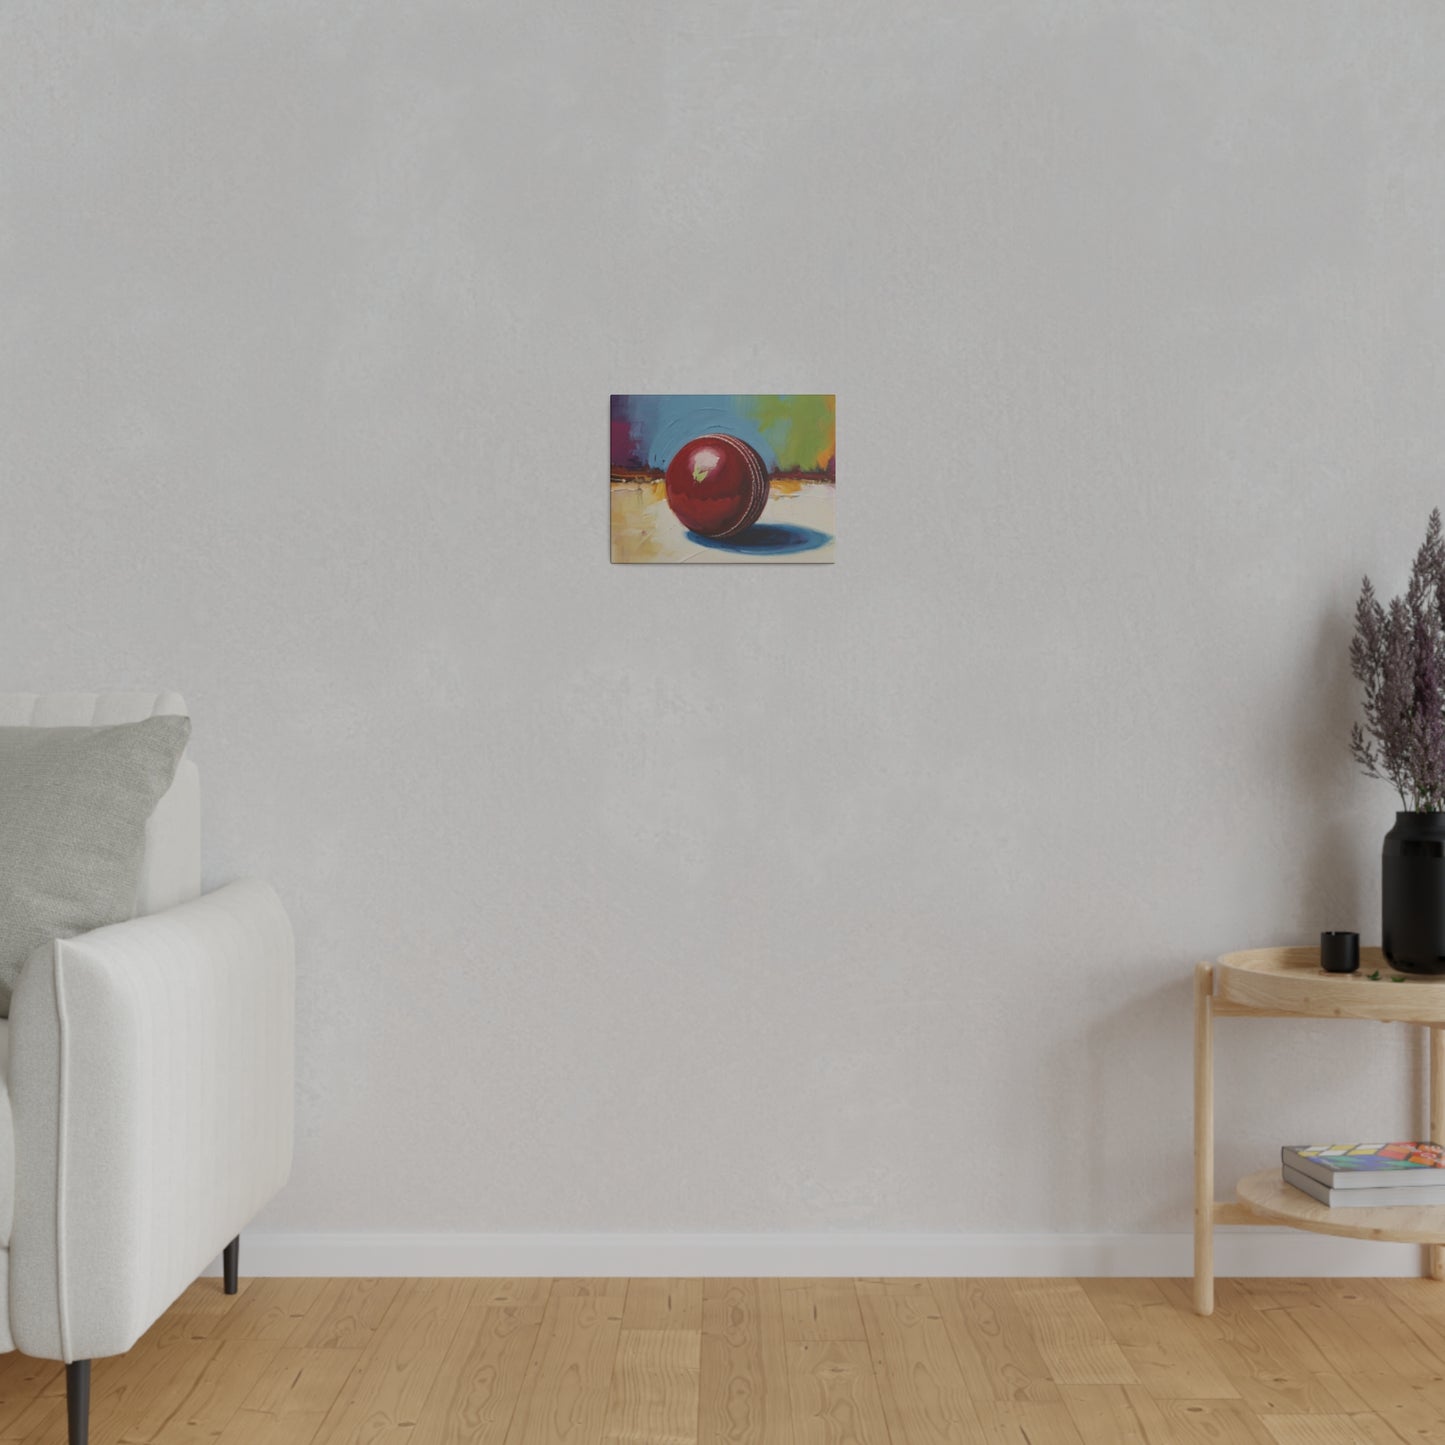 Colourful Background Cricket Ball Canvas - Matte Canvas, Stretched, 0.75"